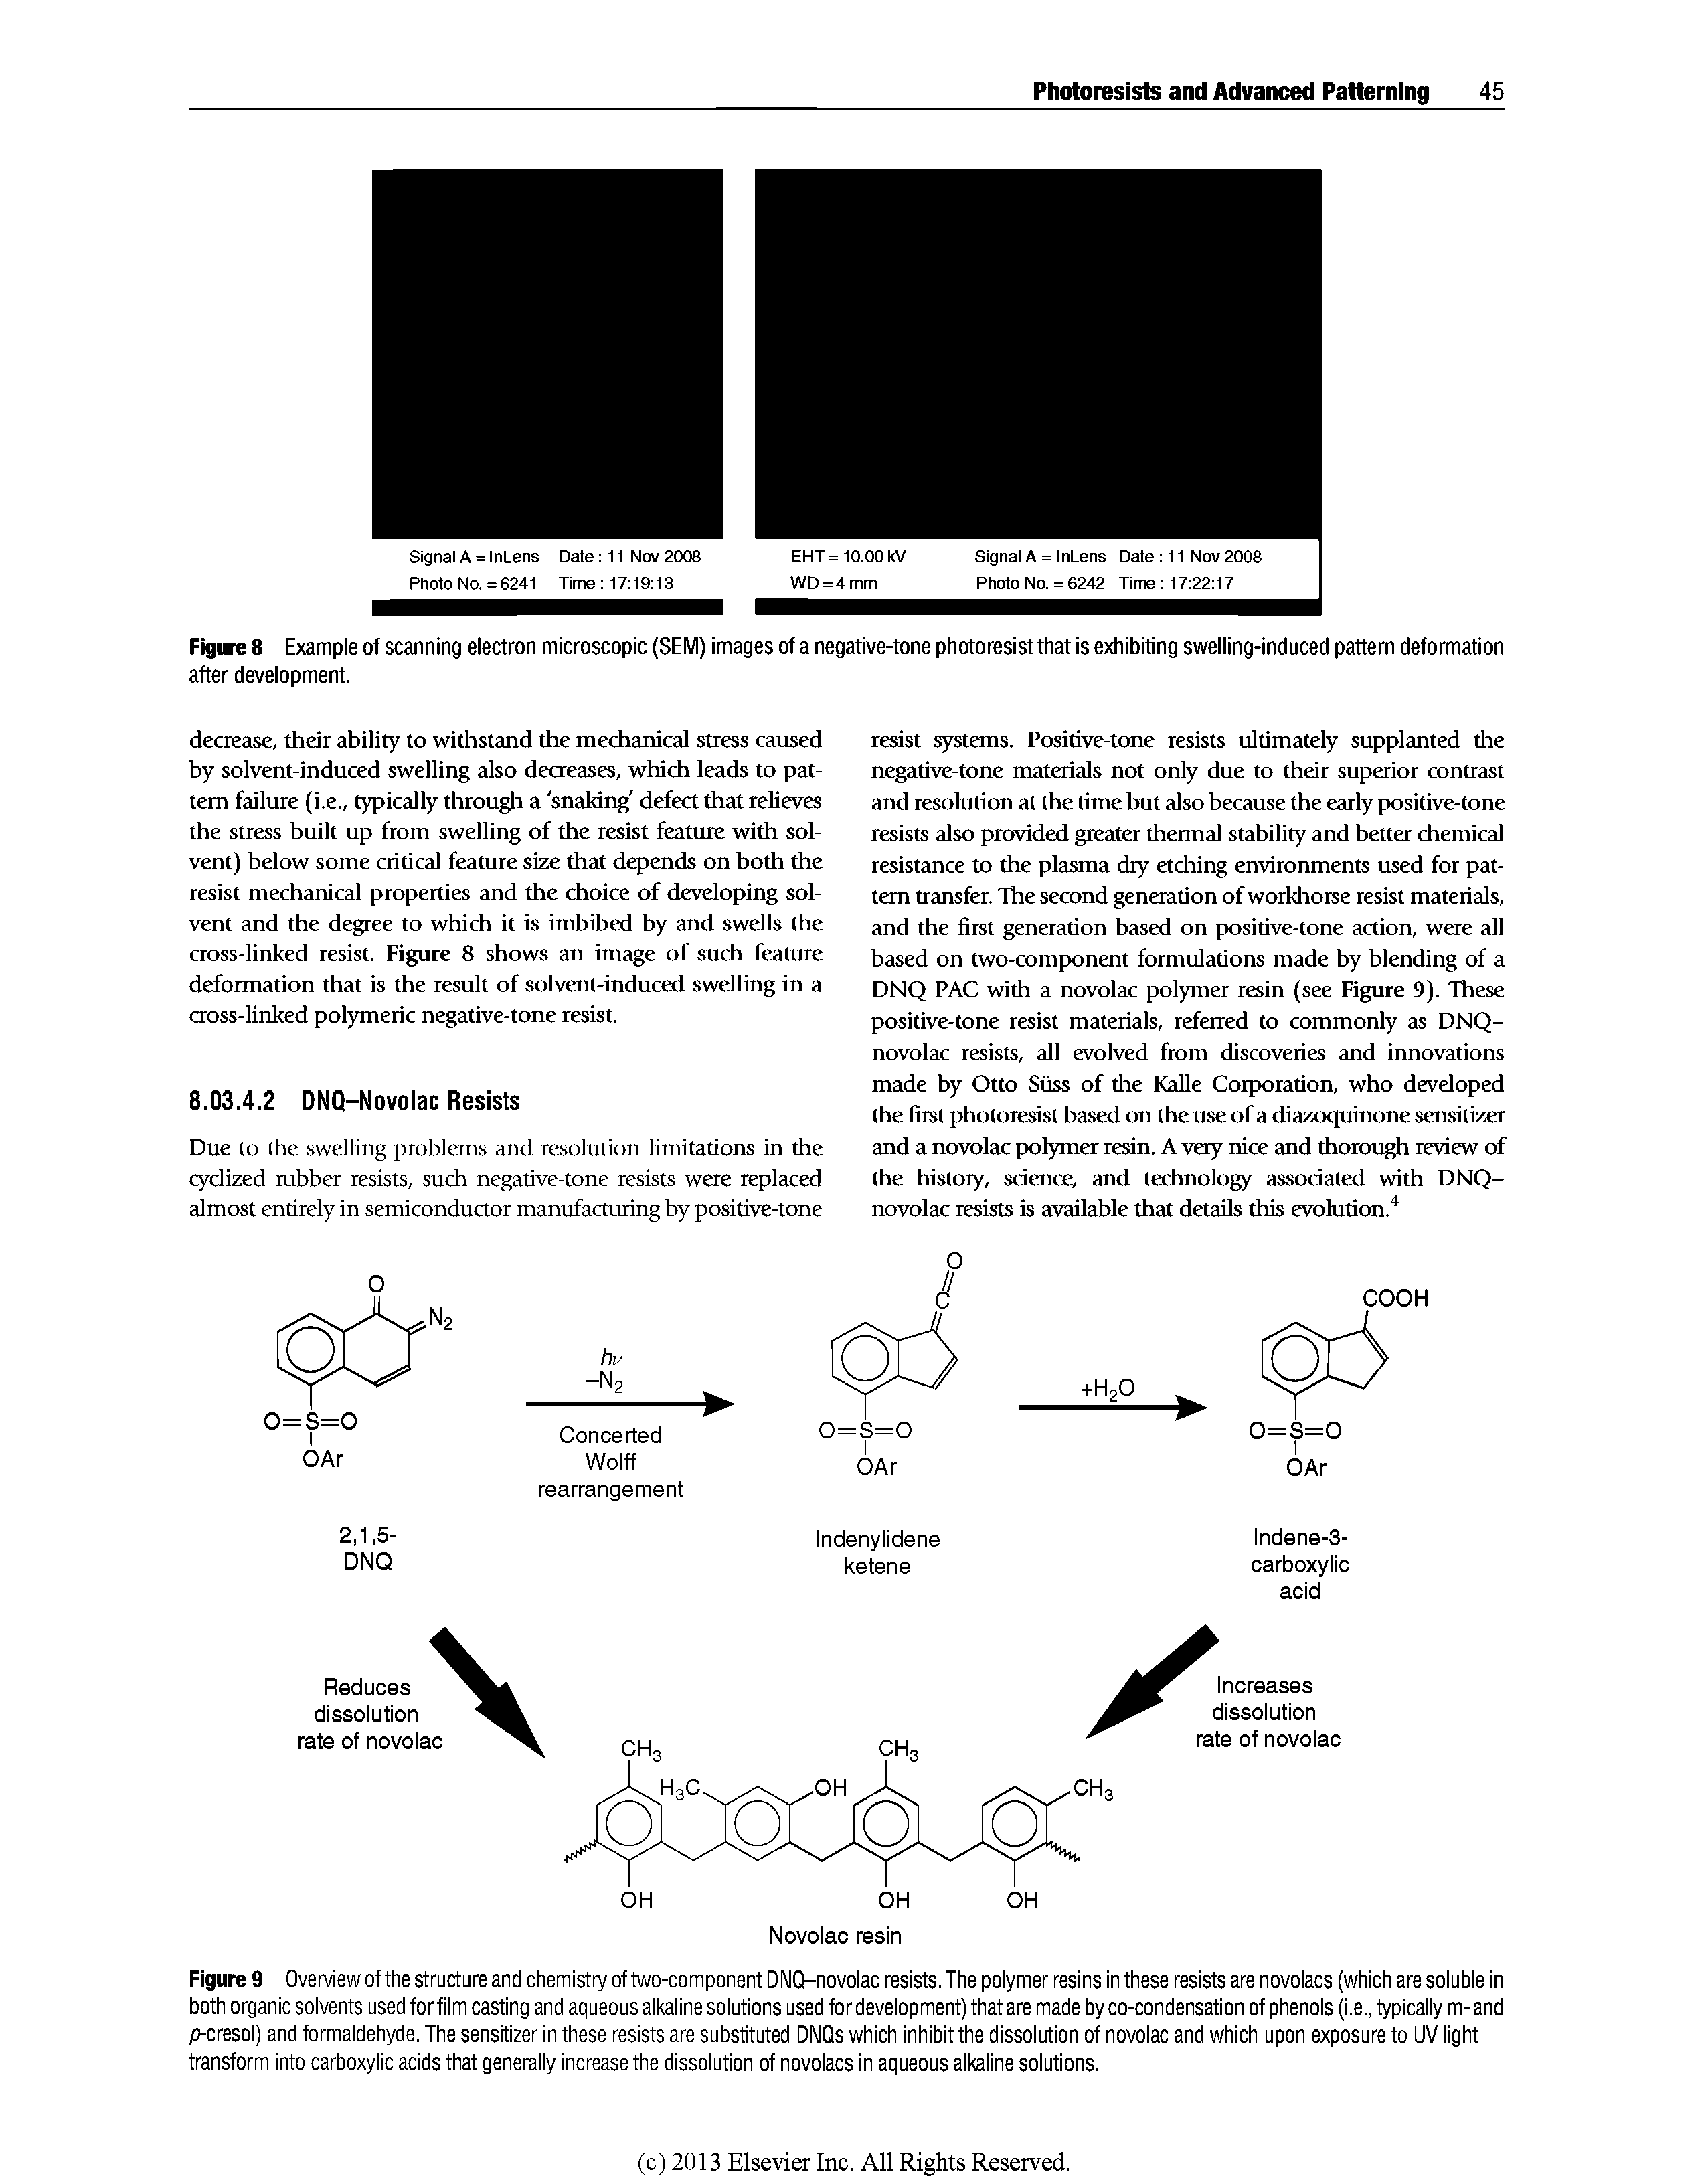 Figure 9 Overview of the structure and chemistry of two-component DNQ-novolac resists. The polymer resins in these resists are novolacs (which are soluble in both organic solvents used for film casting and aqueous alkaline solutions used for development) that are made by co-condensation of phenols (i.e., typically m- and p-cresol) and formaldehyde. The sensitizer in these resists are substituted DNQs which inhibit the dissolution of novolac and which upon exposure to UV light transform into carboxylic acids that generally increase the dissolution of novolacs in aqueous alkaline solutions.